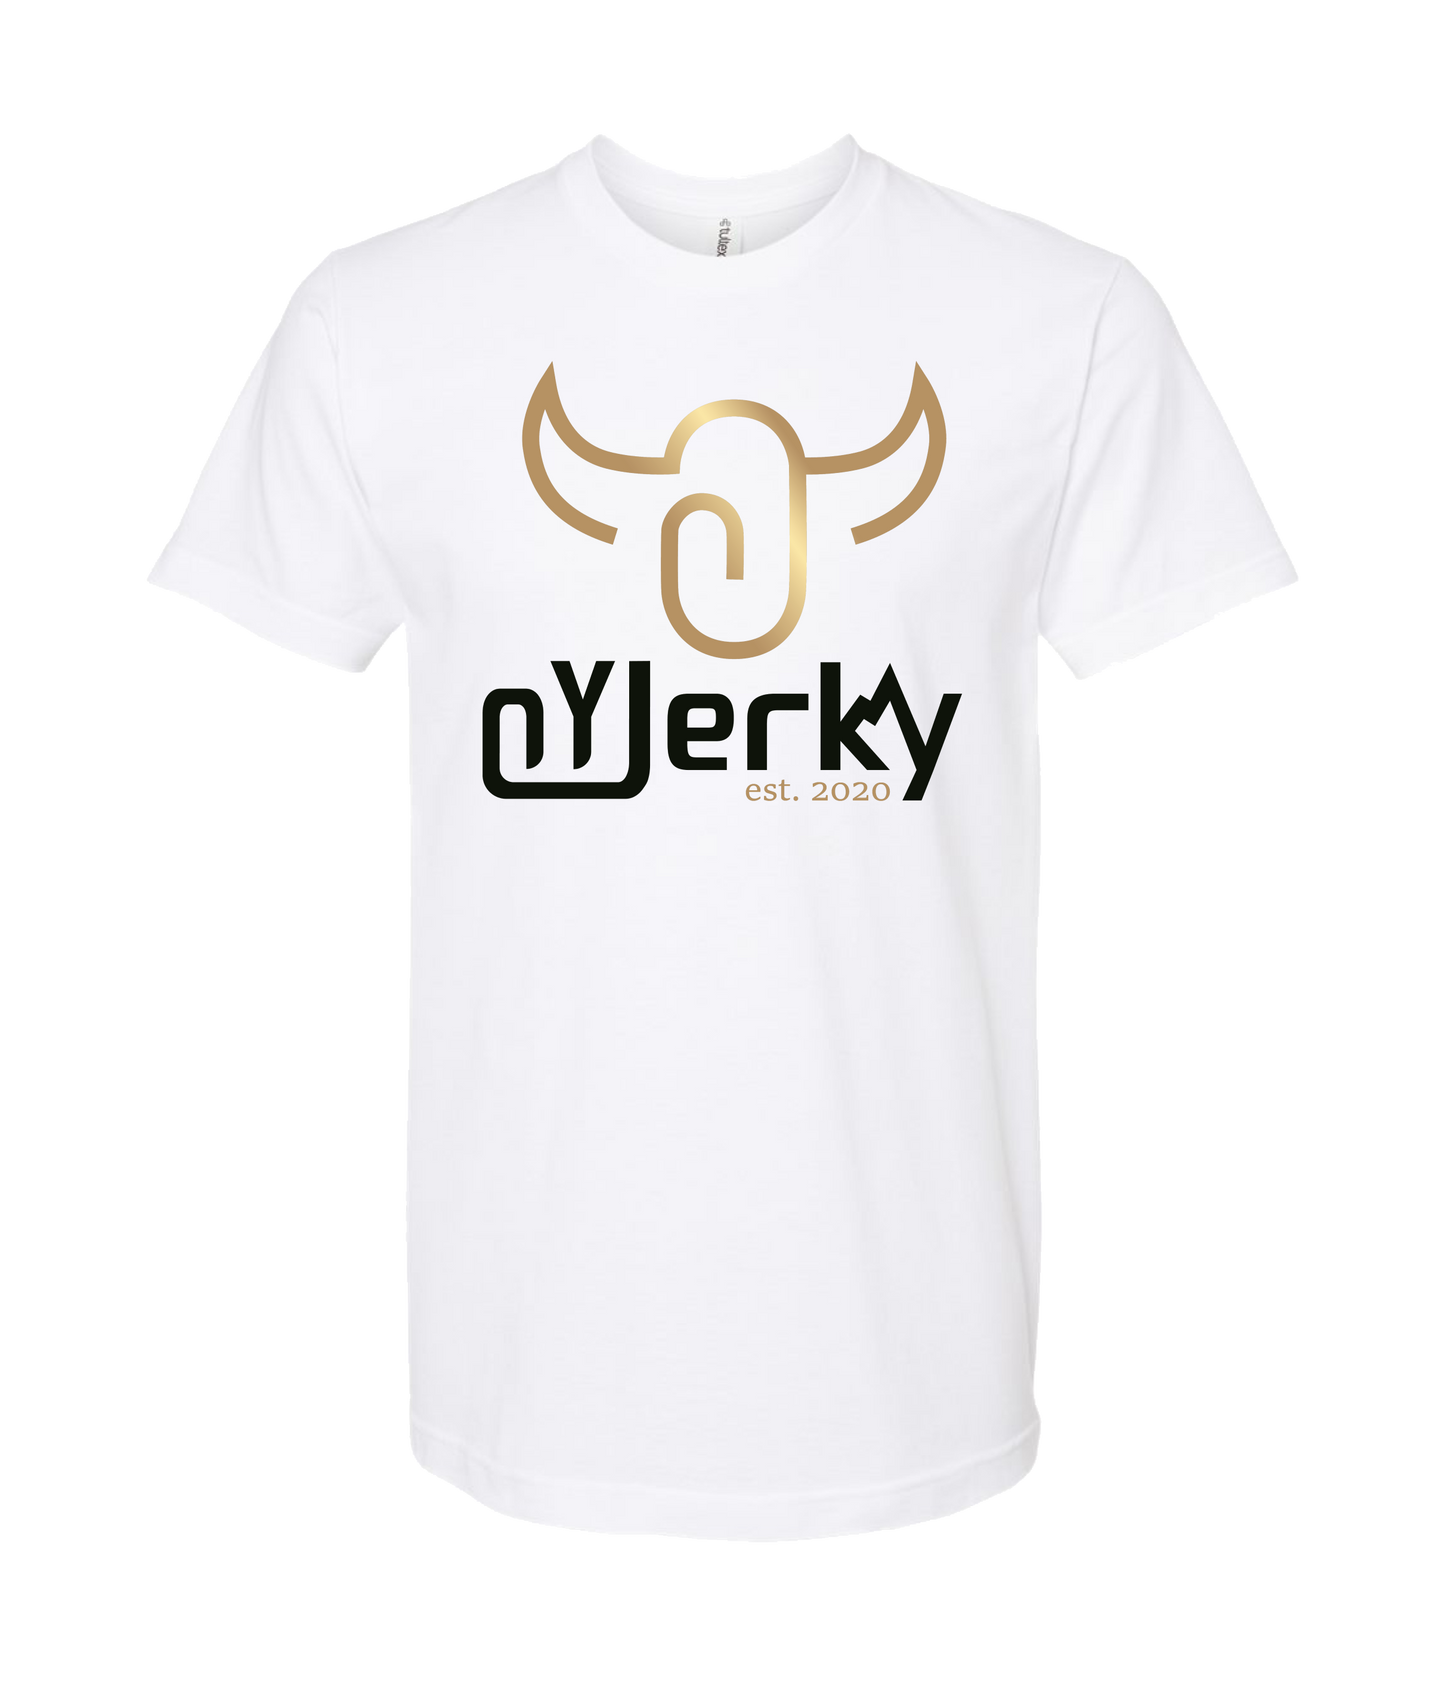 OY Jerky - Primary Logo Color - White T-Shirt